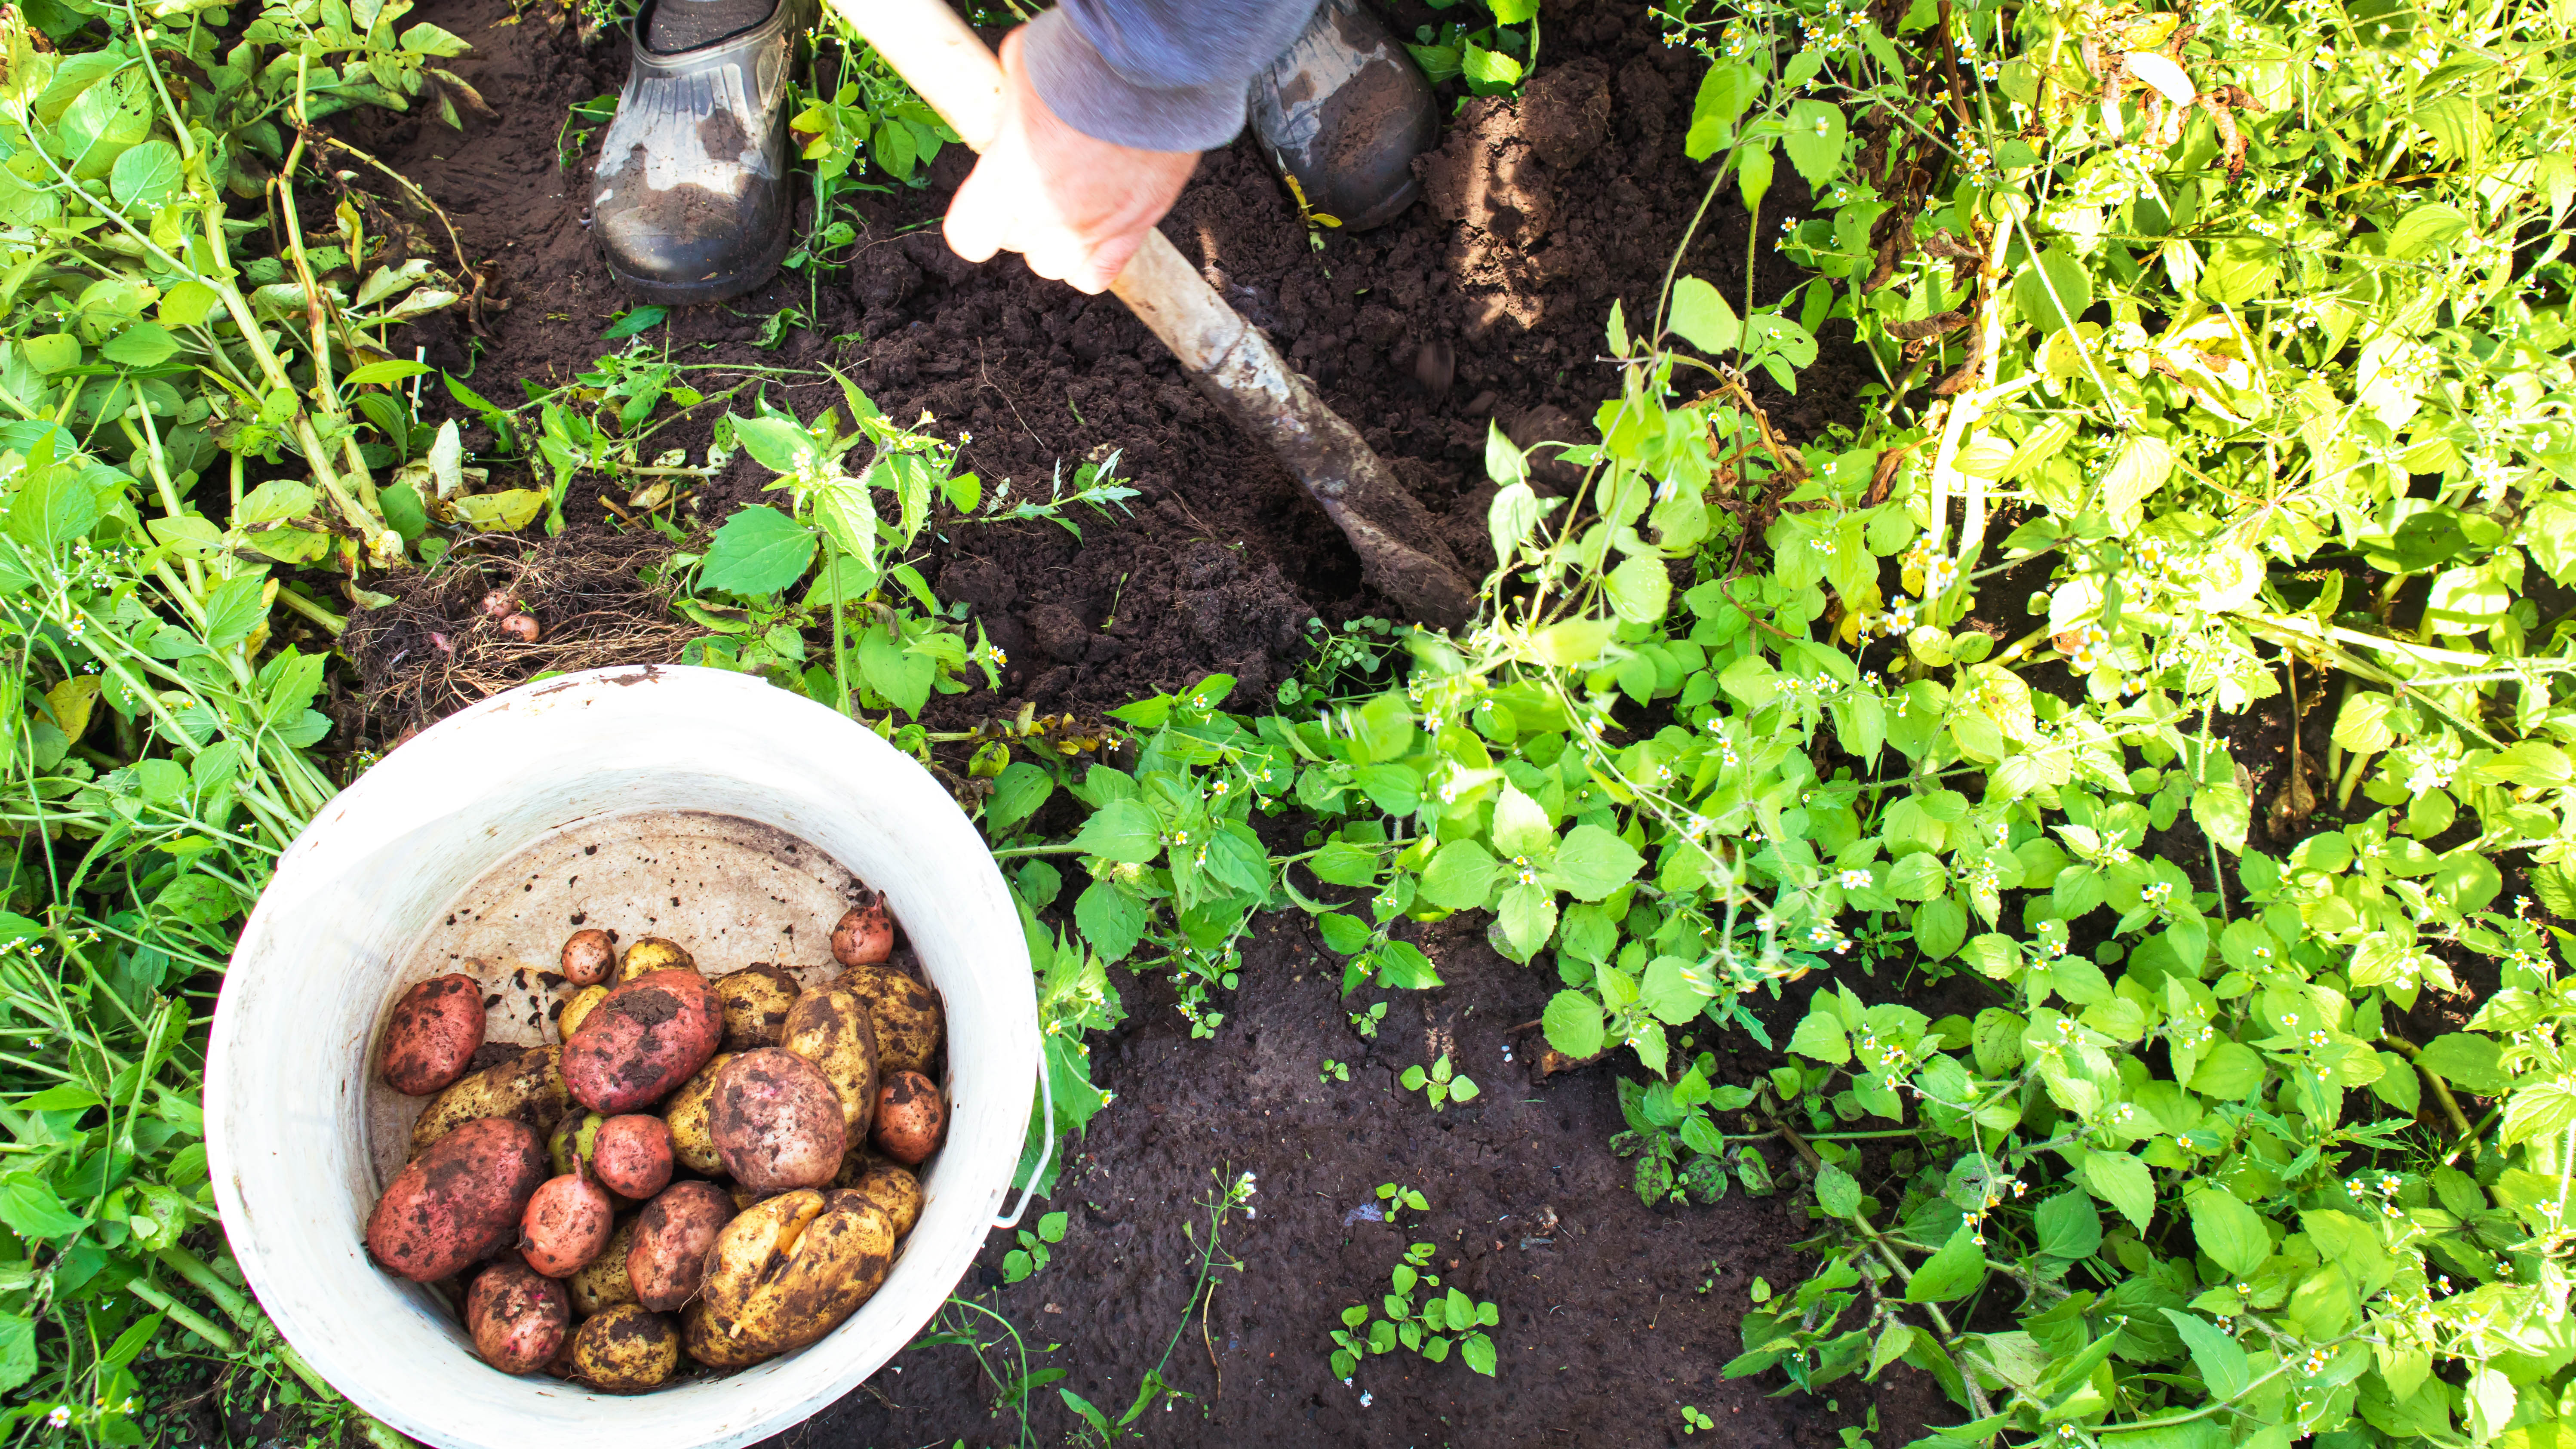 Someone harvests potatoes with a shovel and collects them in buckets